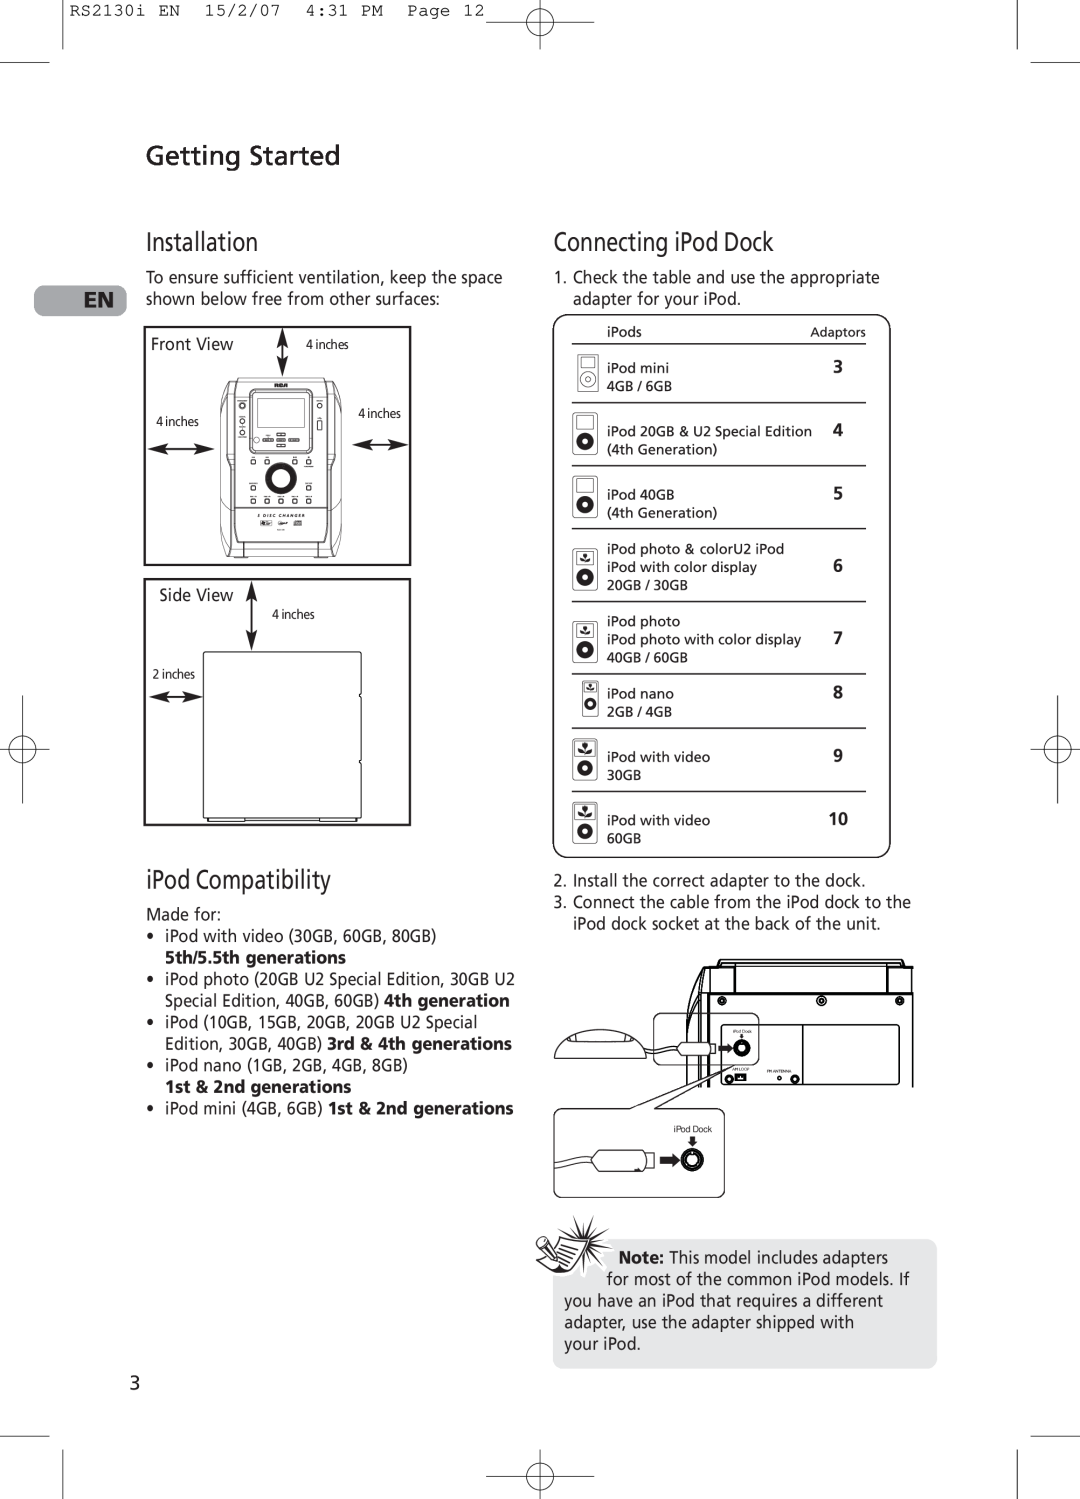 RCA RS2130i user manual Getting Started Installation, Connecting iPod Dock, iPod Compatibility, 5th/5.5th generations 